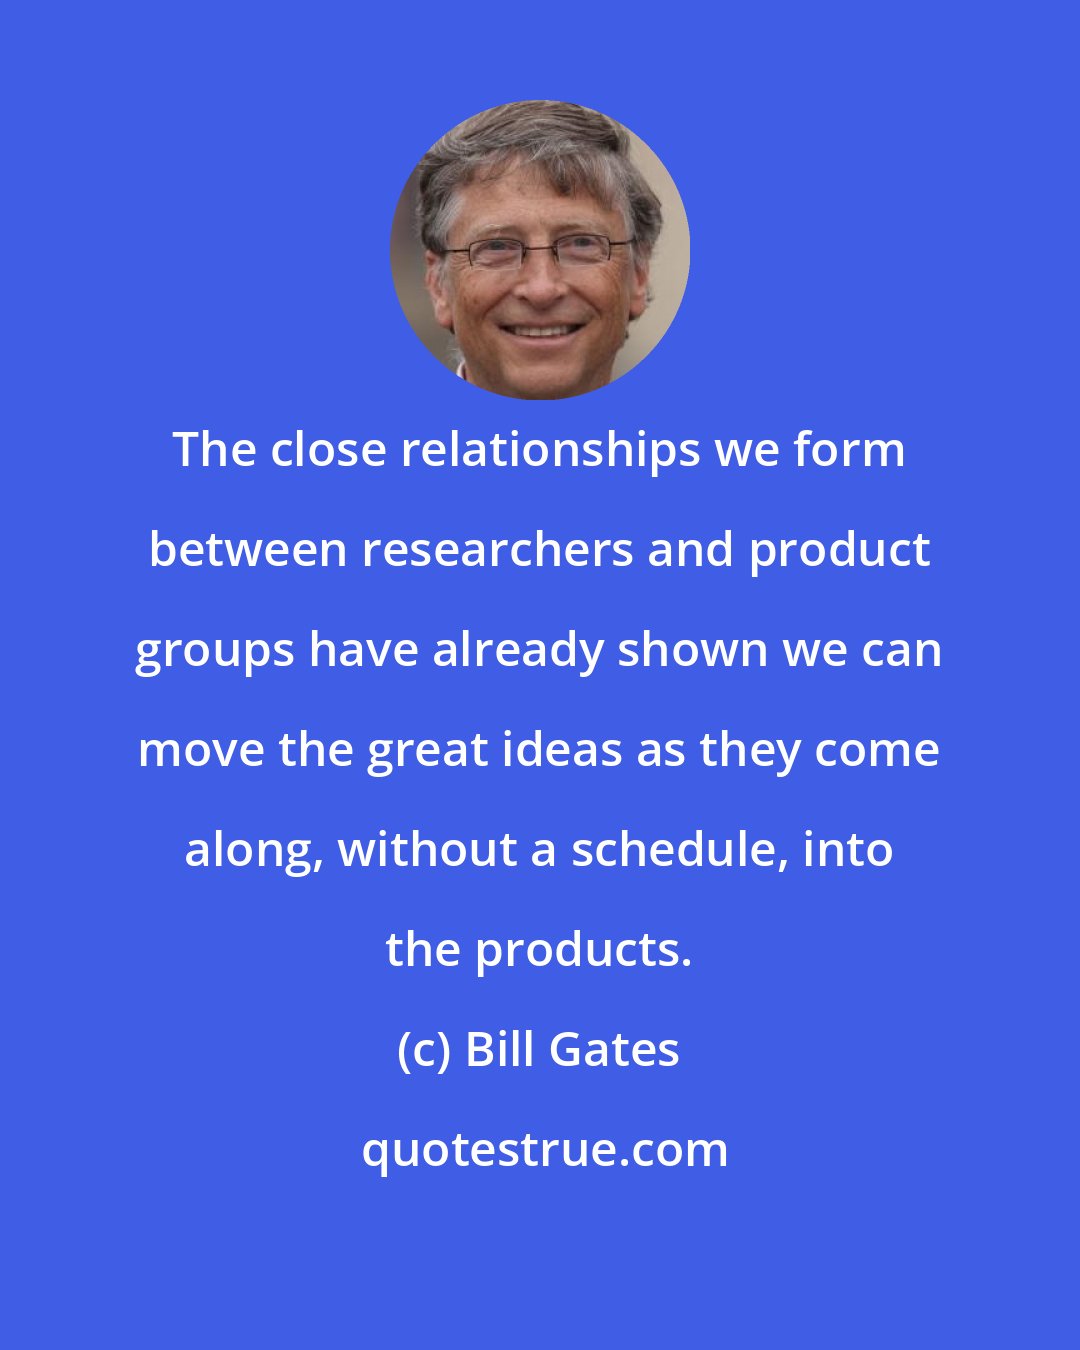 Bill Gates: The close relationships we form between researchers and product groups have already shown we can move the great ideas as they come along, without a schedule, into the products.